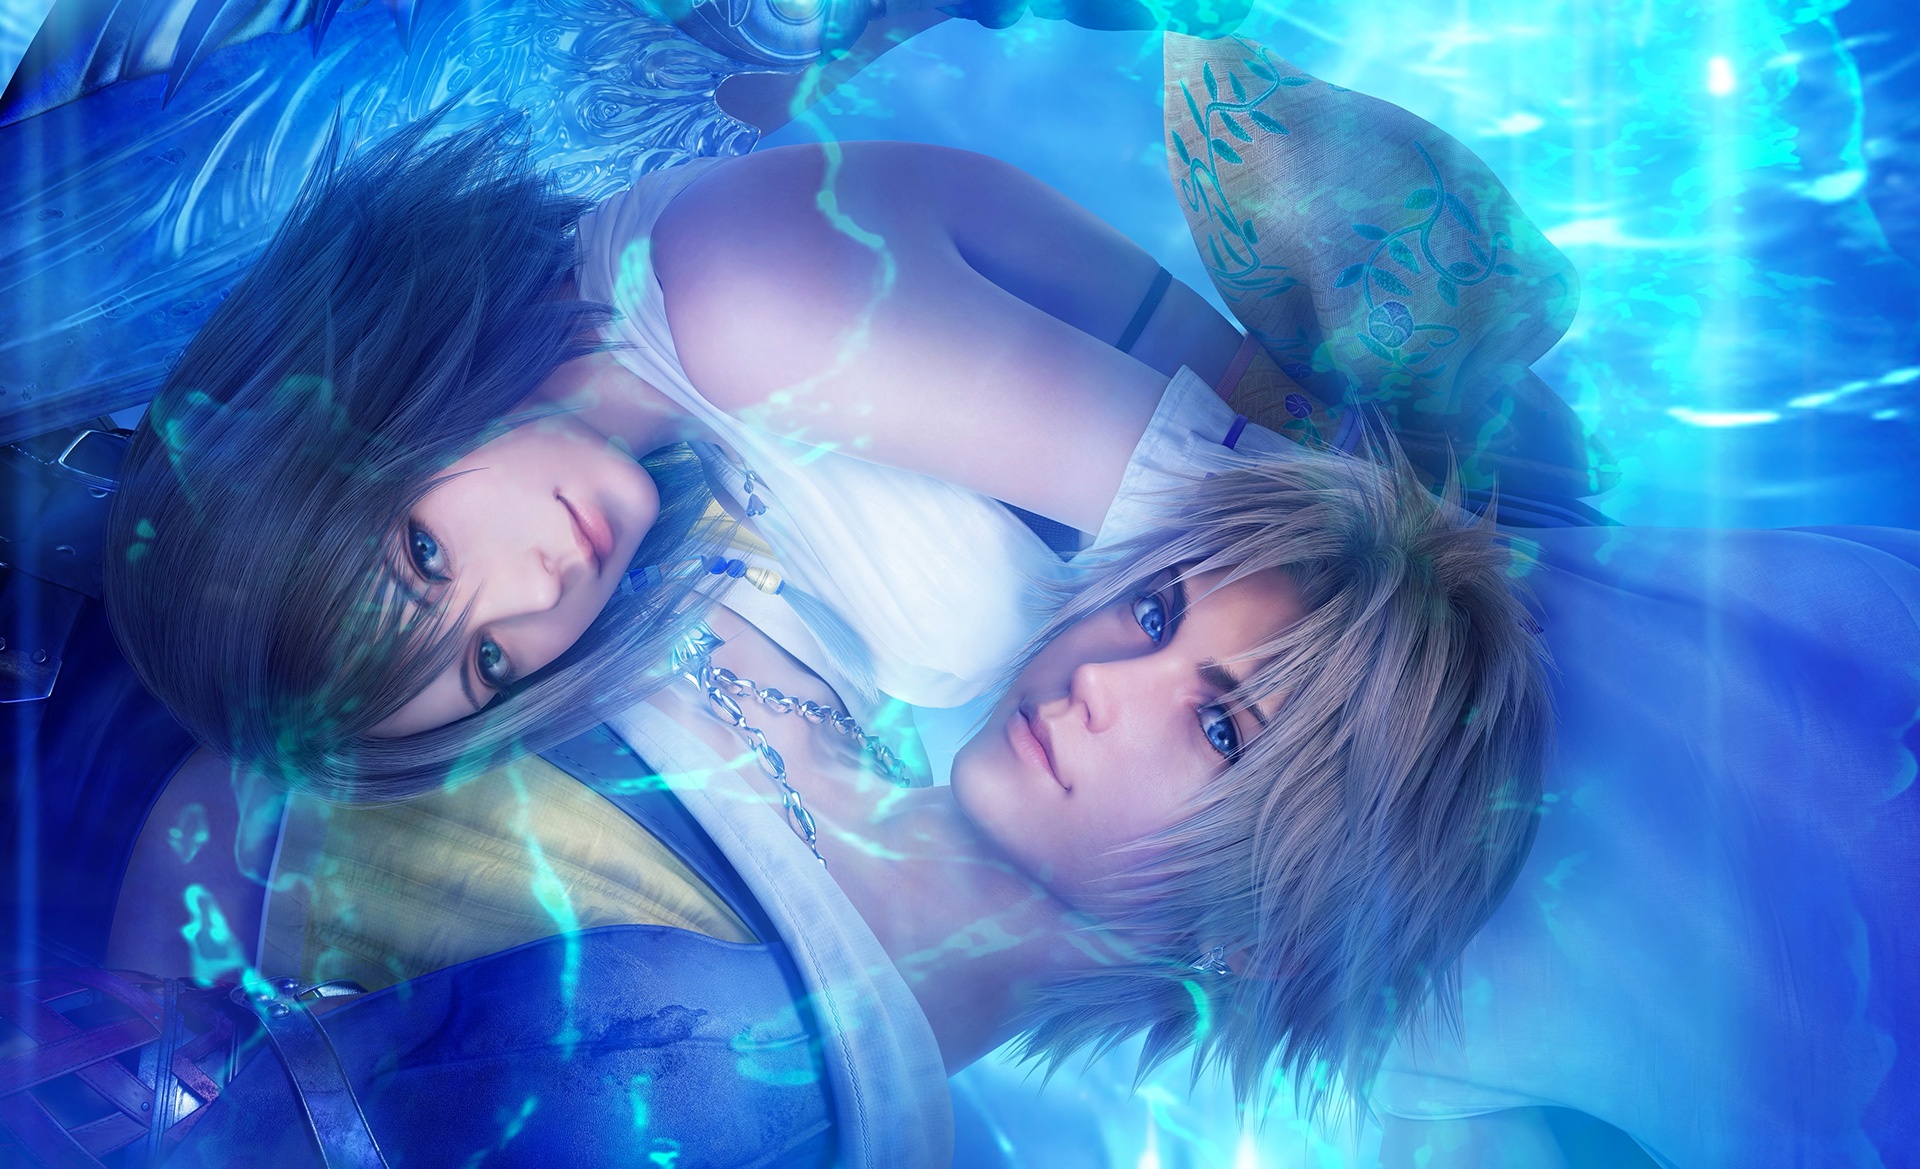 free download final fantasy x and x 2 switch